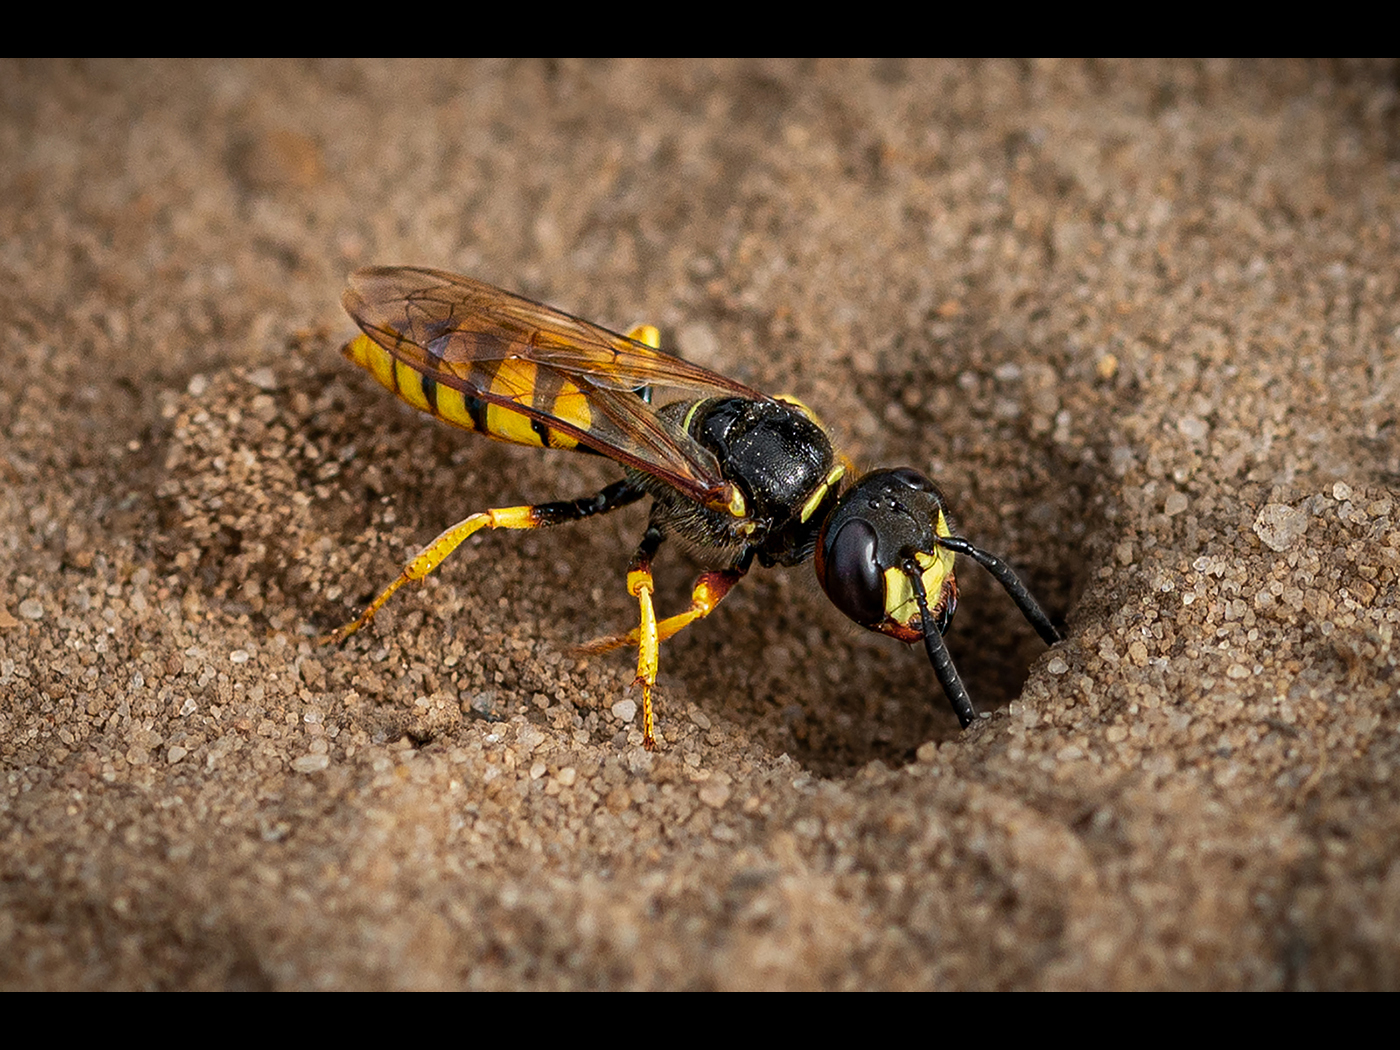 PHILANTHUS TRIANGULUM (BEE WOLF) DIGGING by Lois Webb